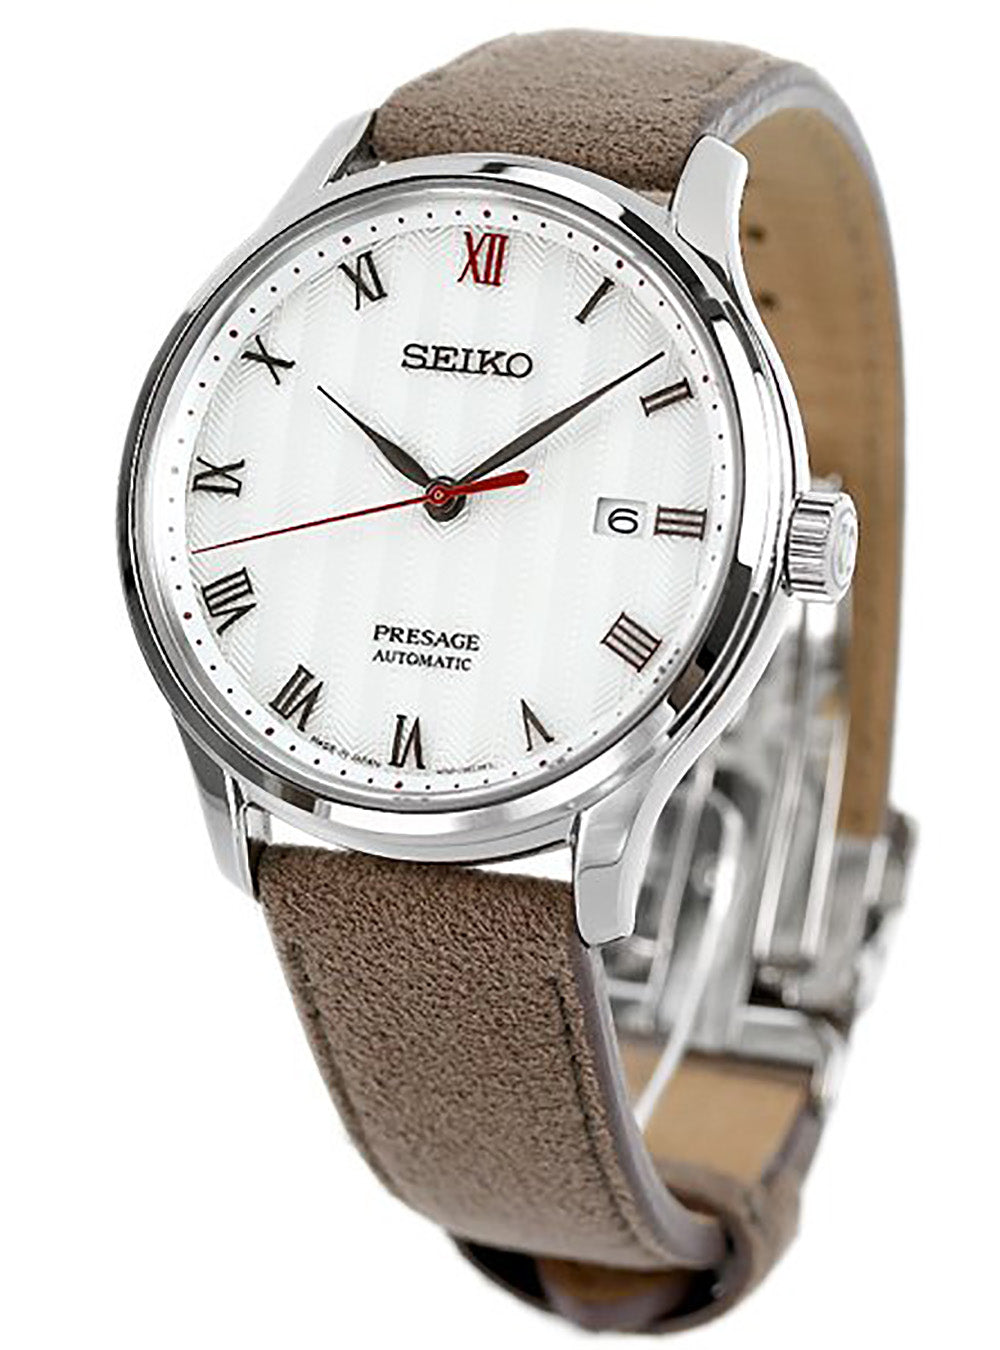 SEIKO PRESAGE JAPANESE GARDEN SARY205 MADE IN JAPAN JDM Only 1 left in